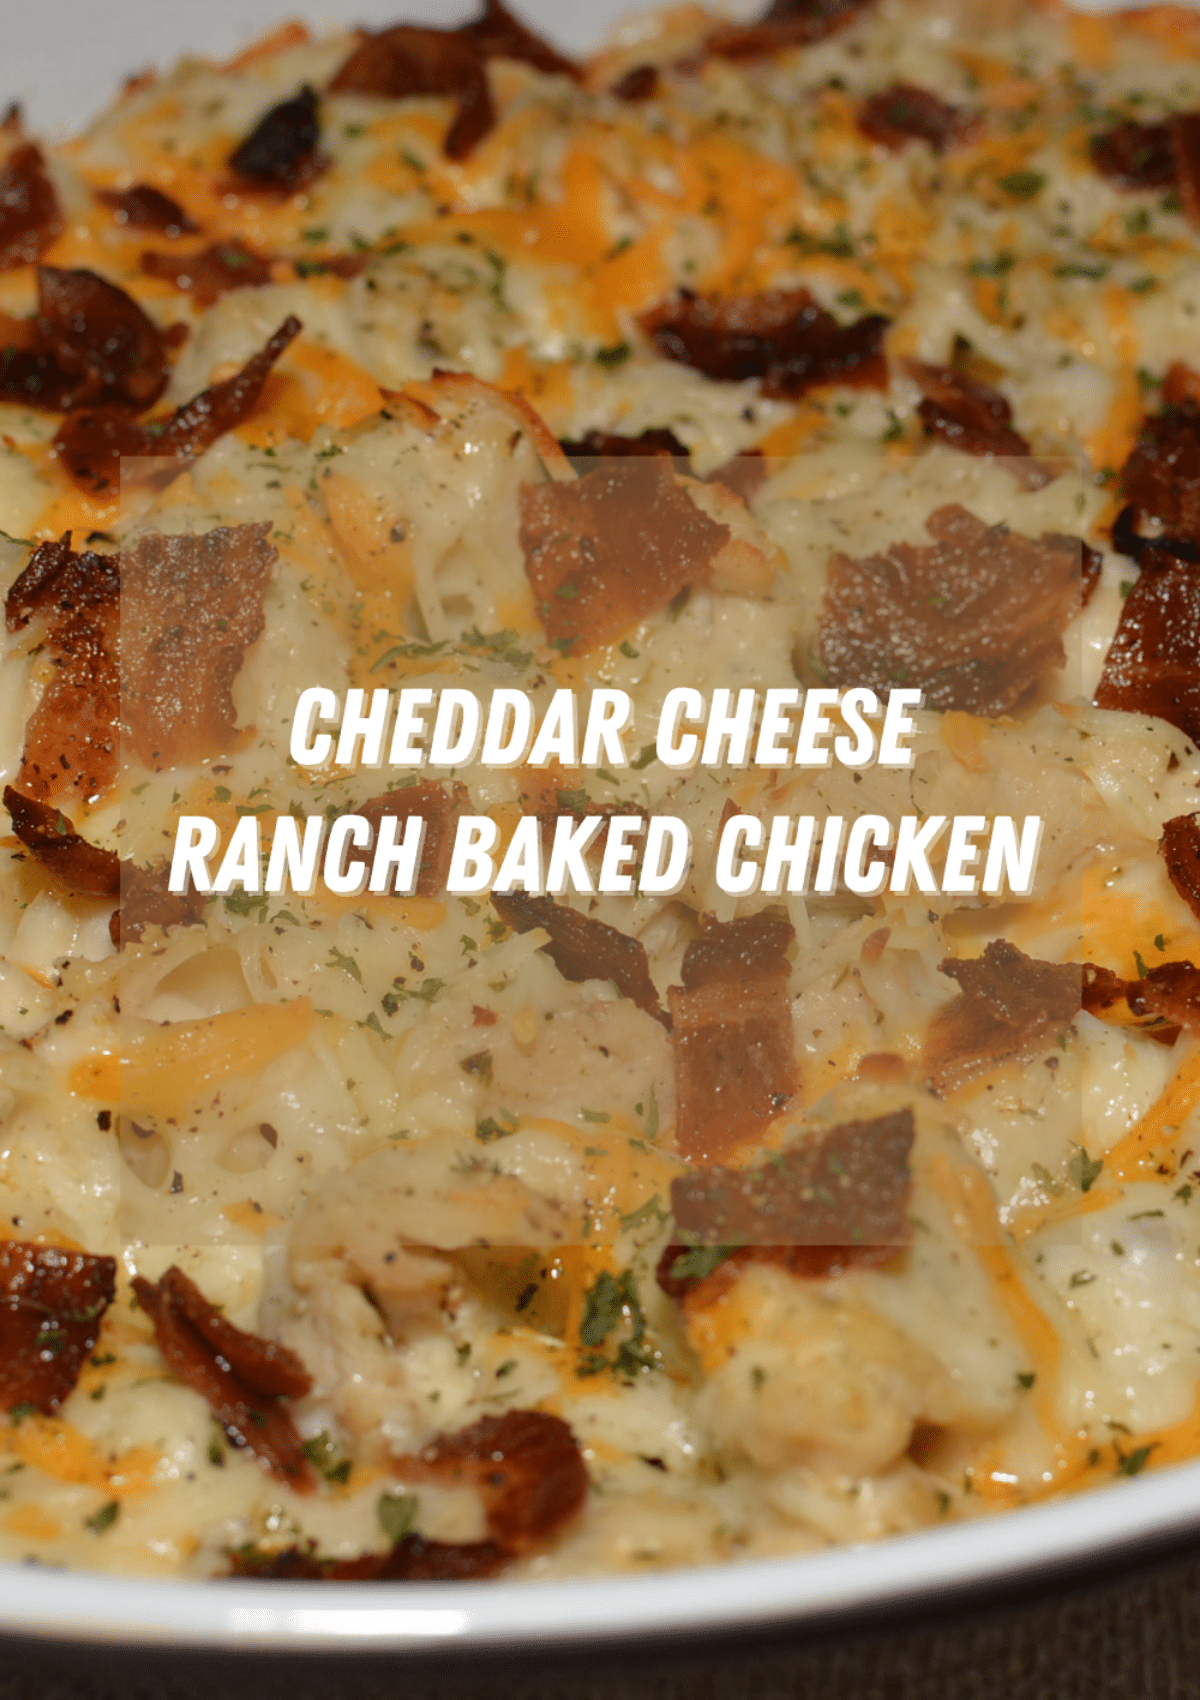 Tasty and Crunchy Cheddar Cheese Ranch Baked Chicken